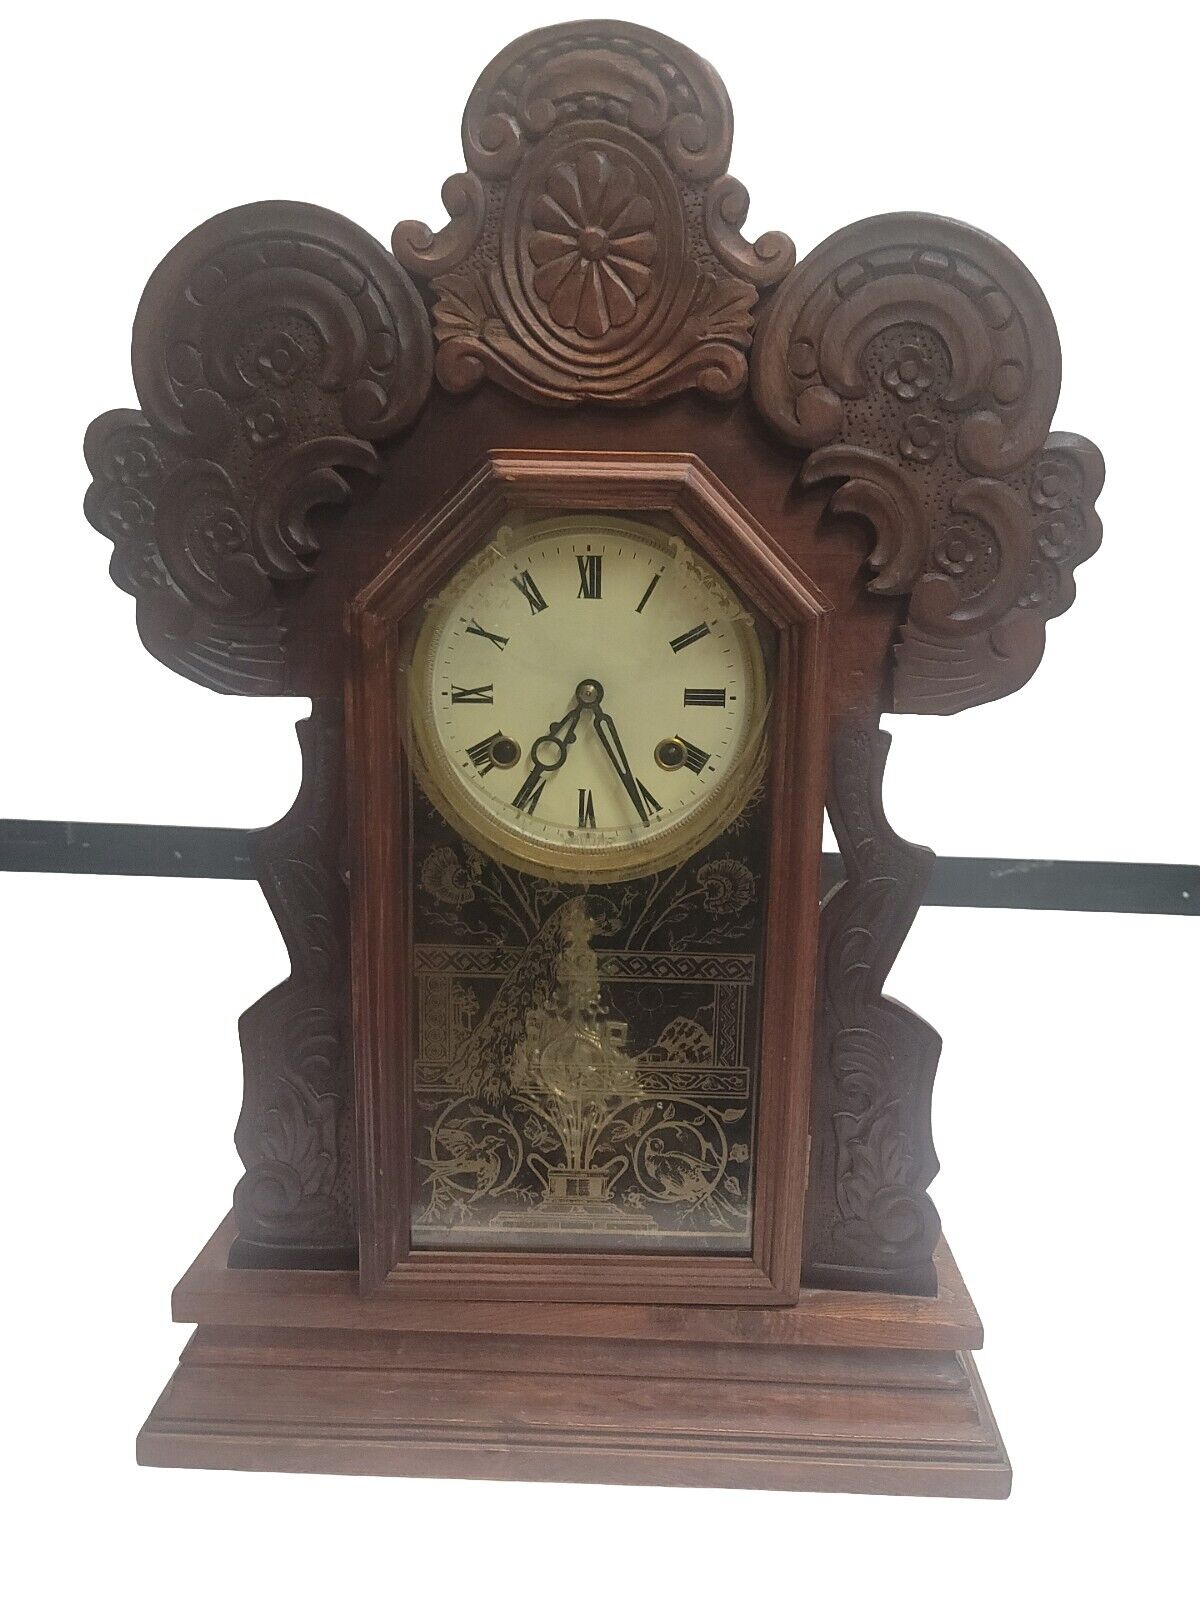 Antique Grandfather Clock Unknown Manufacturer. Working Condition Amazing...